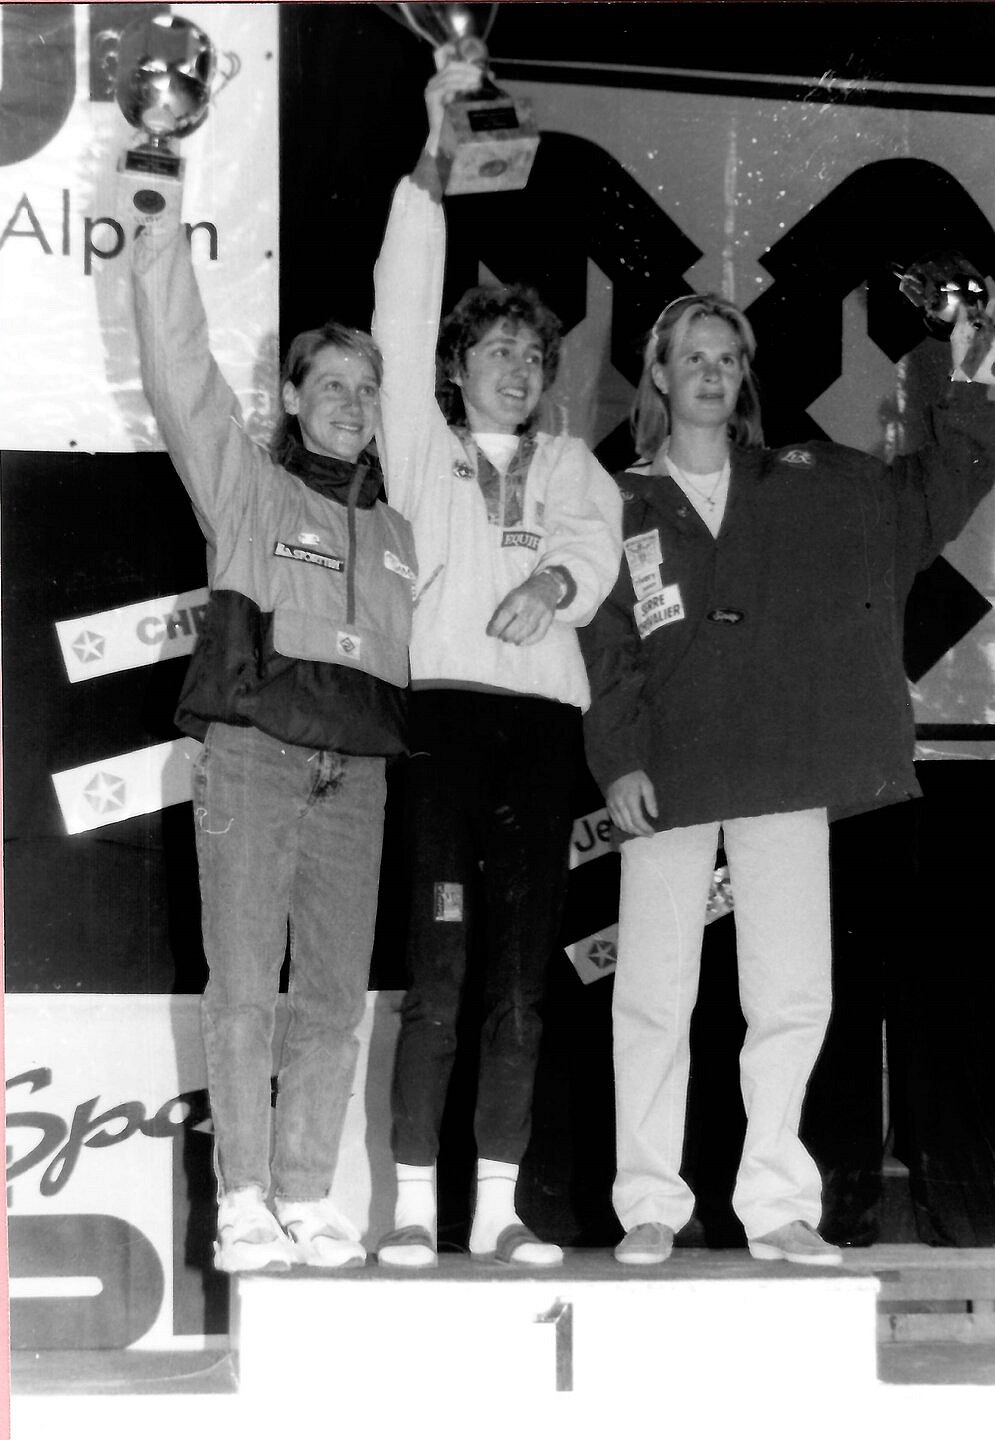 The women’s podium at the 1993 World Championships: Robyn Erbesfield (USA), Susi Good (SUI) and Isabelle Patissier (FRA).  © Max John, courtesy of Susi Good